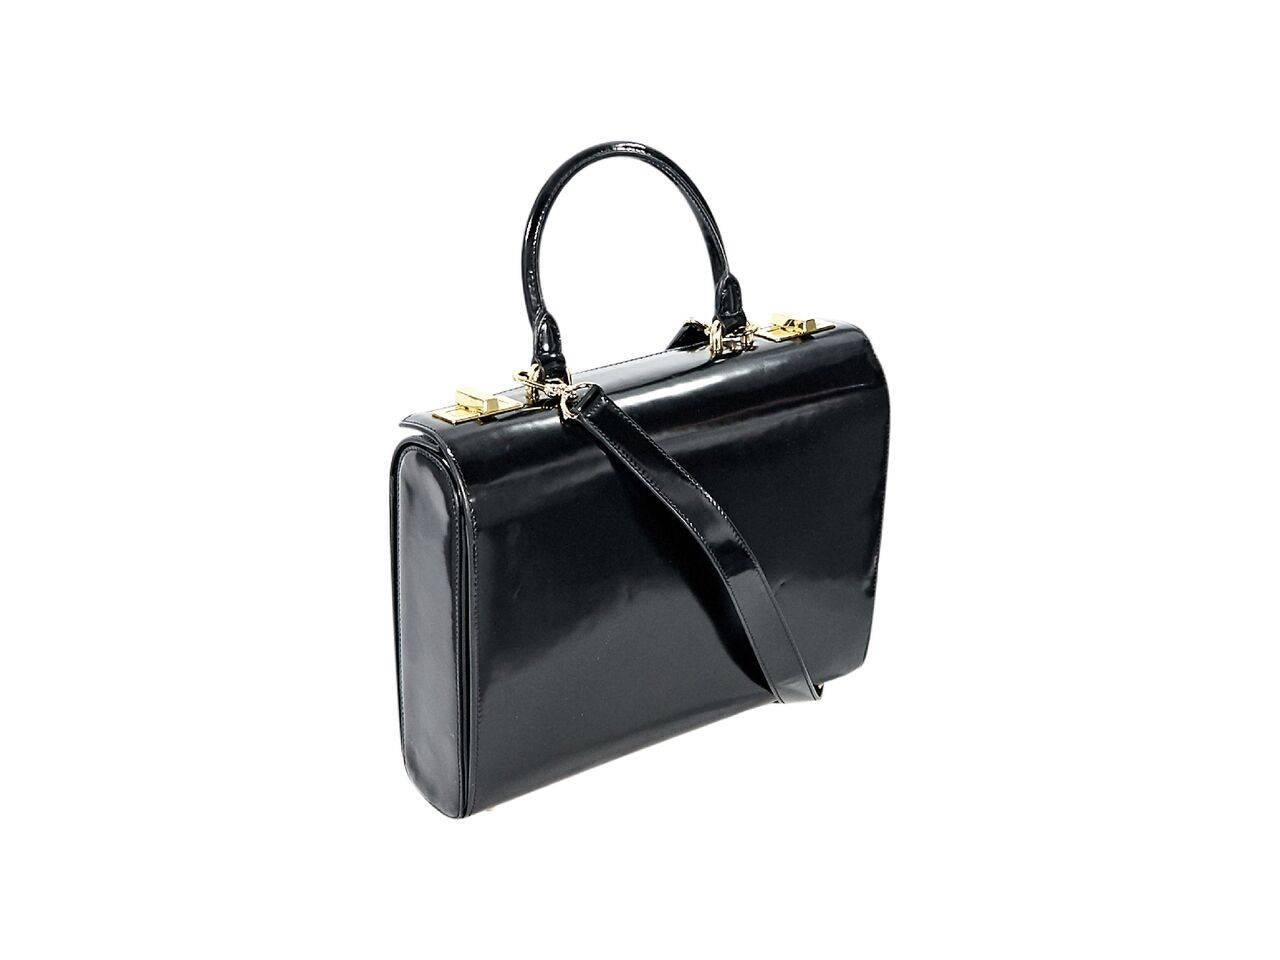 Product details:  Black patent leather briefcase by Simone Rocha.  Top carry handle.  Detachable, adjustable crossbody strap.  Double twist-lock closure.  Lined interior with inner slide pocket and attached zip pouch.  Protective metal feet. 